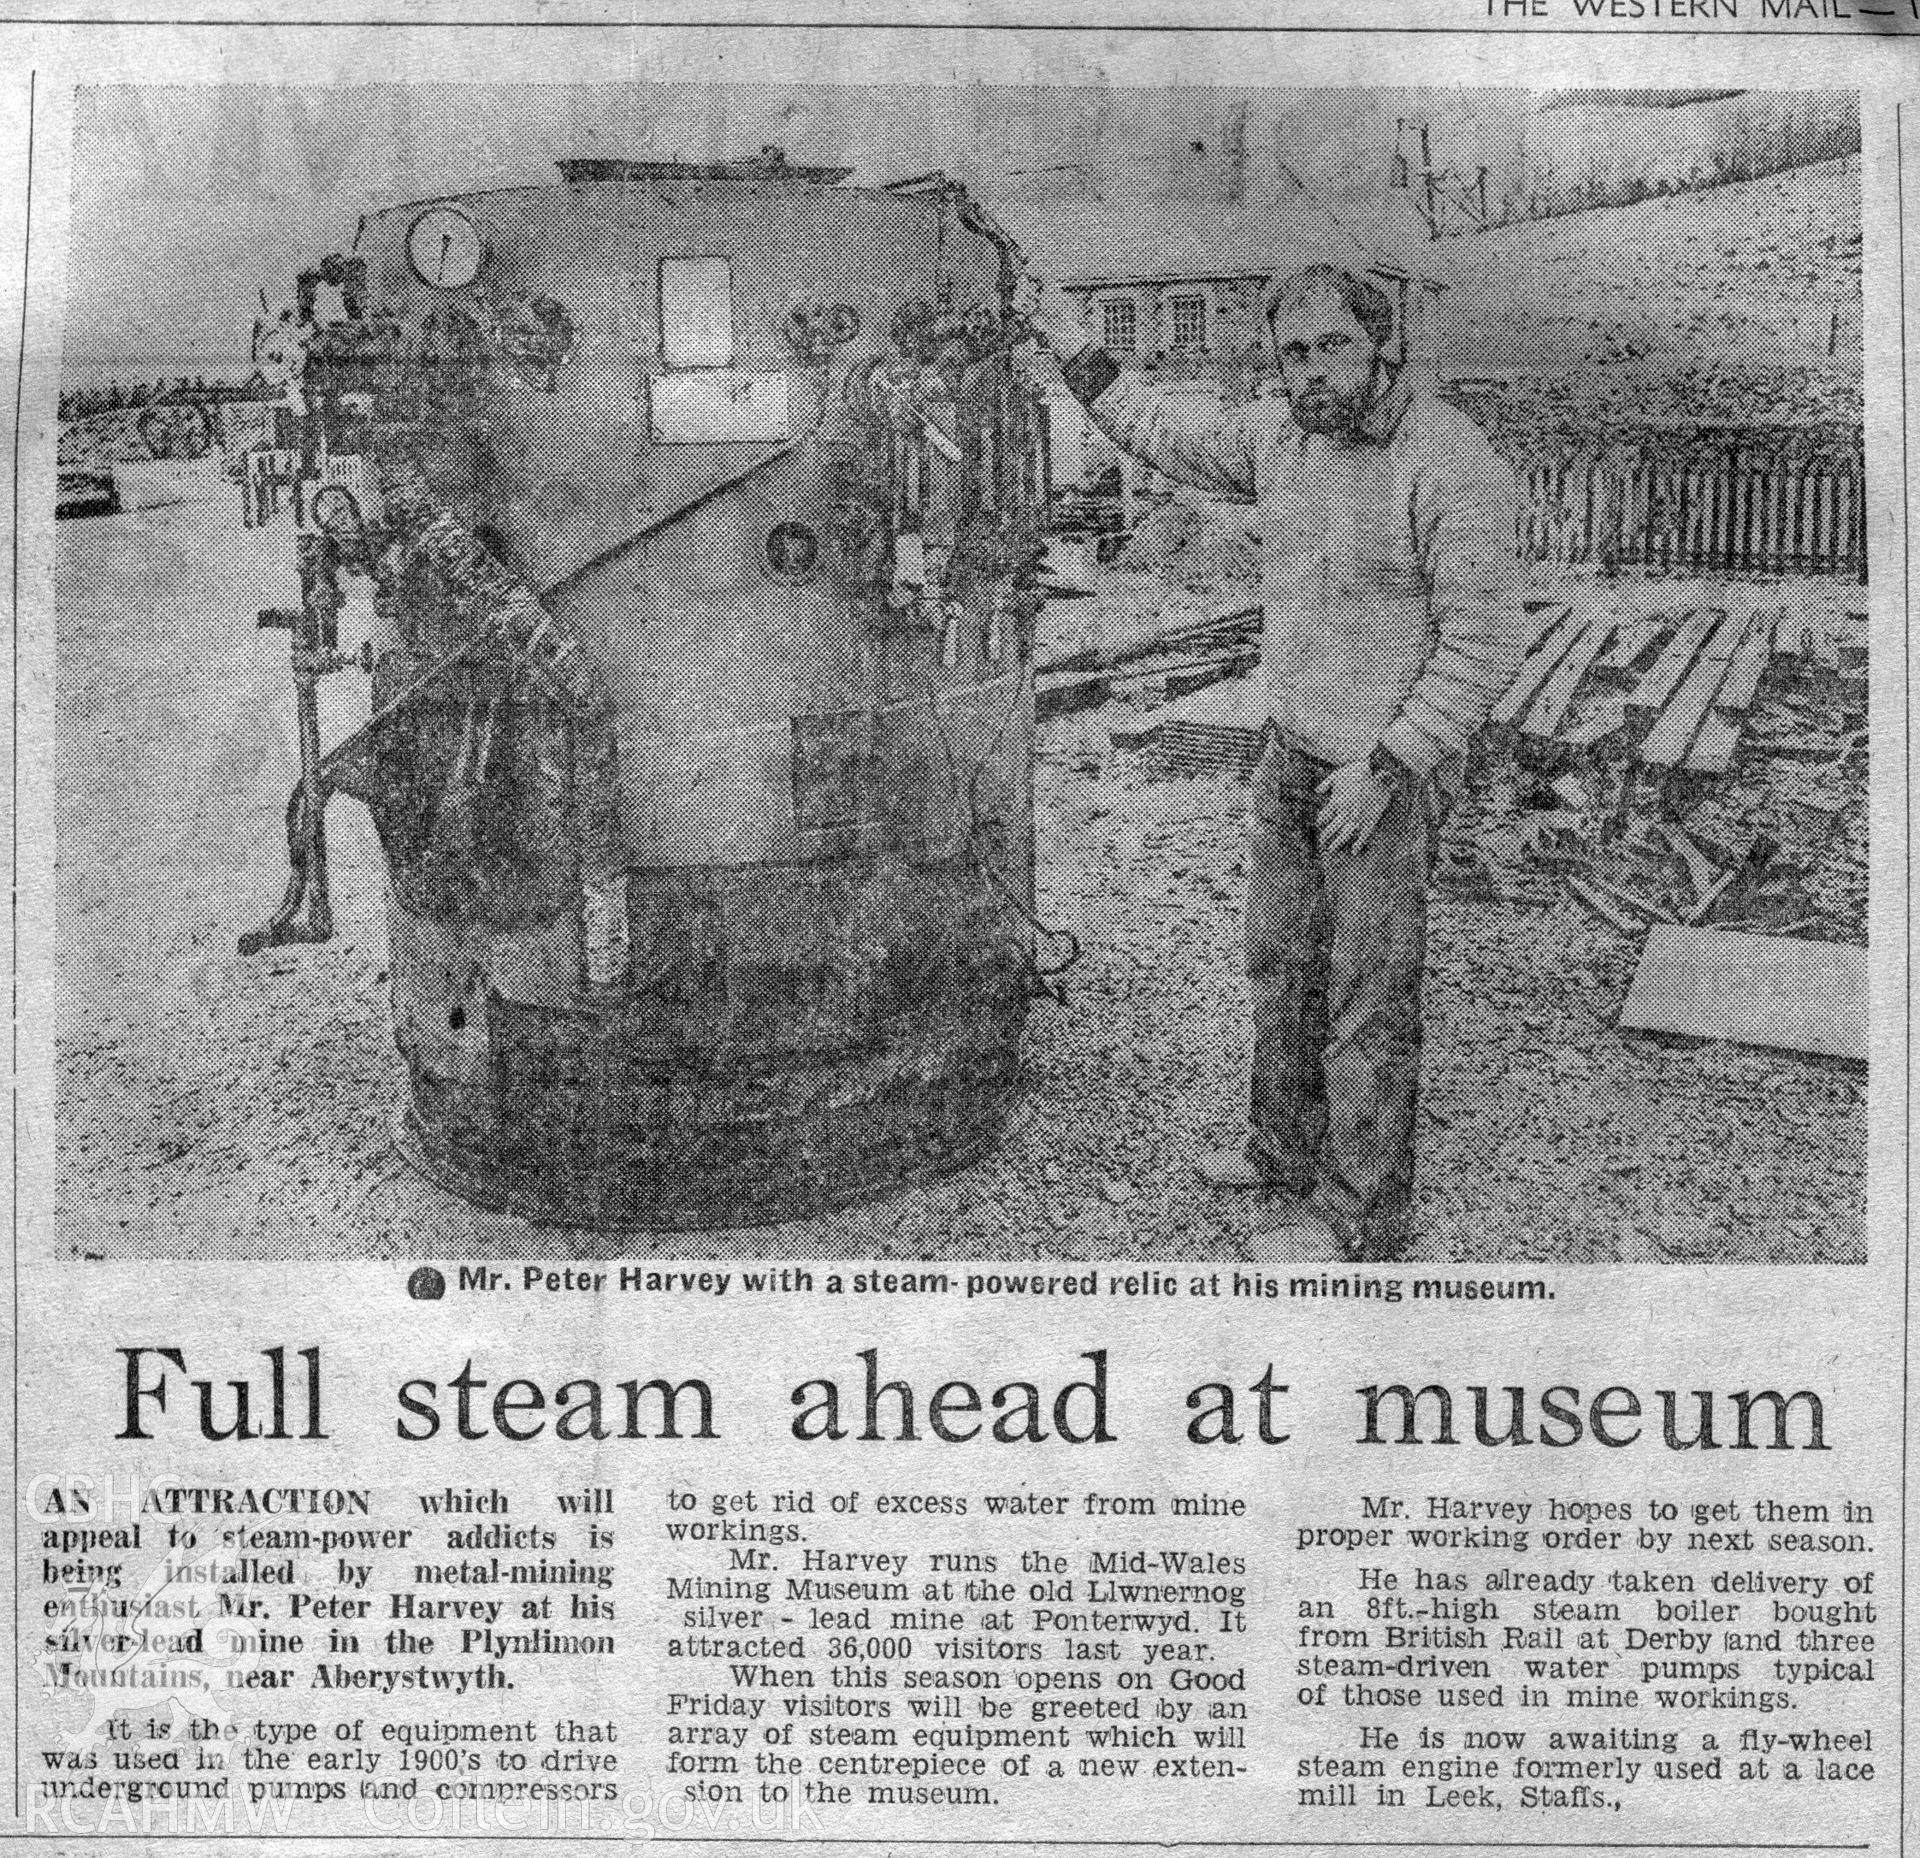 Digital copy of a newspaper cutting from the Western Mail. The article details the acquistition of an early 20th century steam pump acquired by Mr Peter Harvey, who ran the Mid-Wales Mining Museum at Llywernog Mine, Ponterwyd. Part of the article is a photograph of Peter Harvey standing next to the new acquisition.